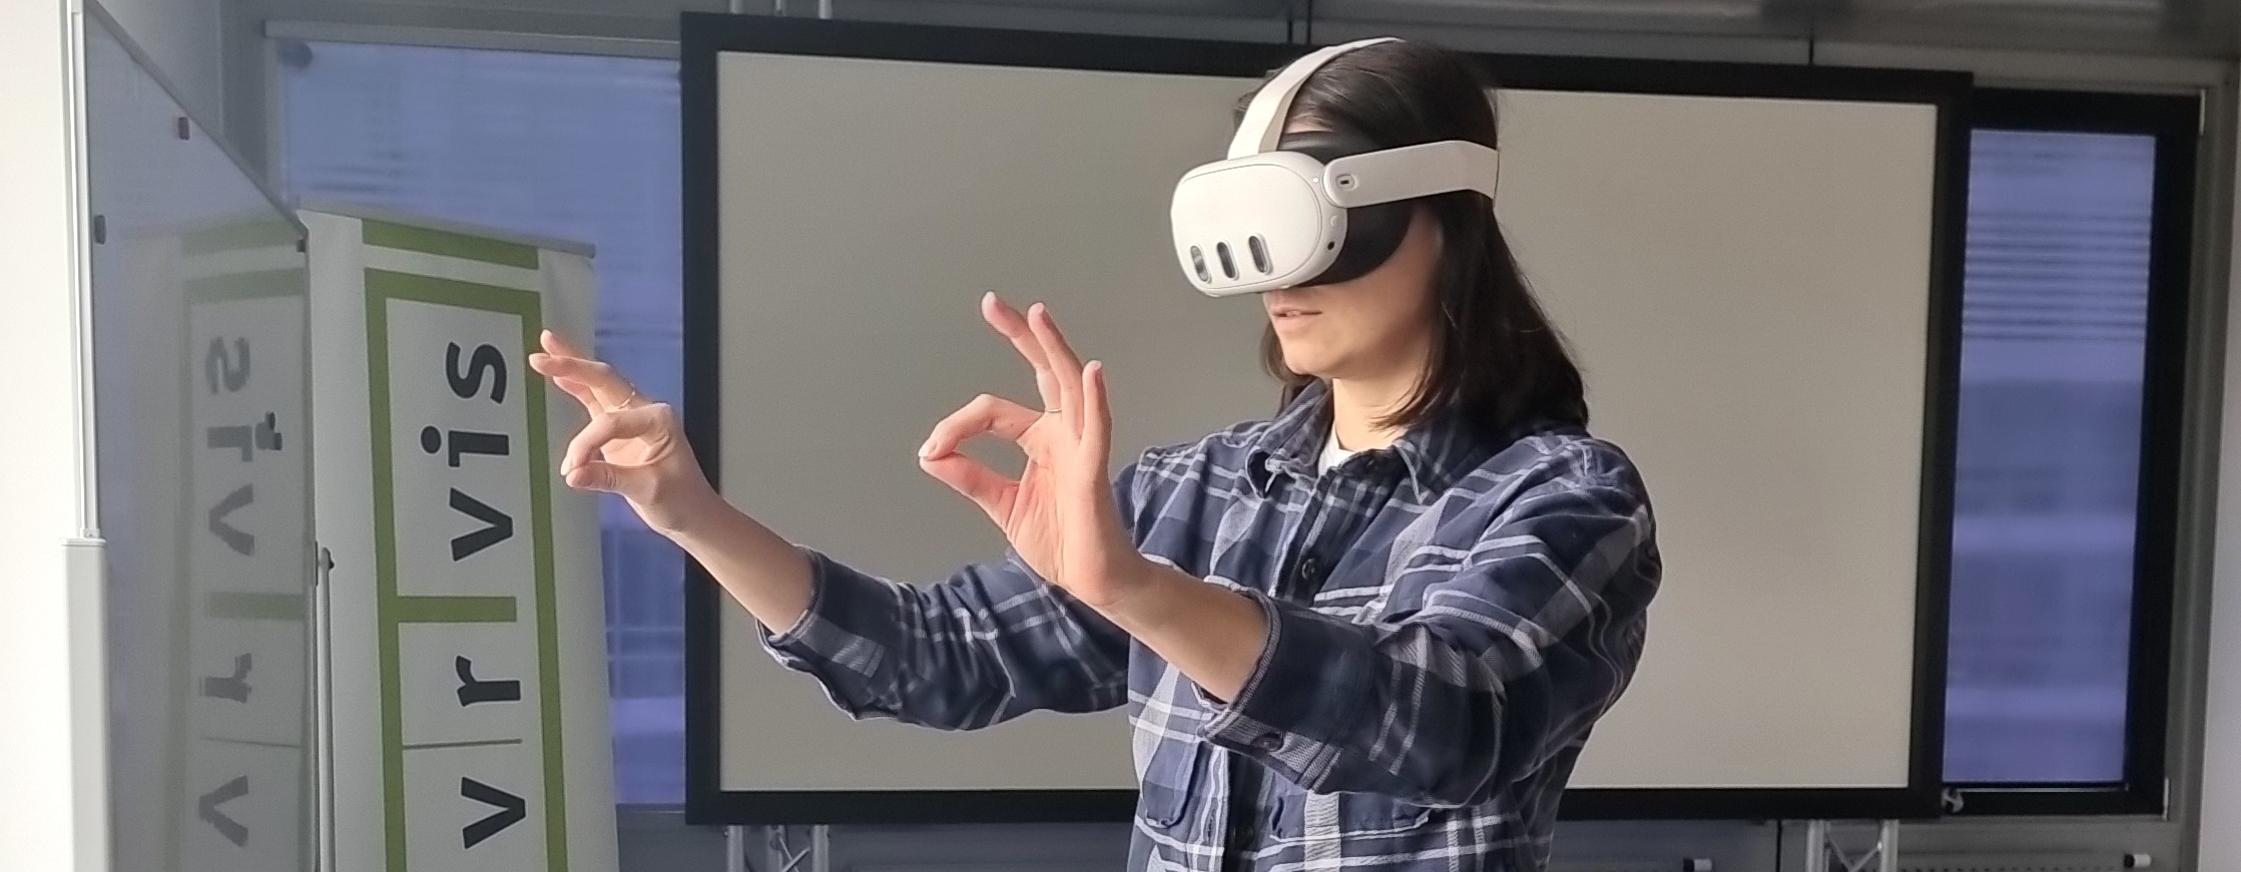 Woman wearing Meta Quest 3 virtual reality headset making pinching gestures in an office environment. 